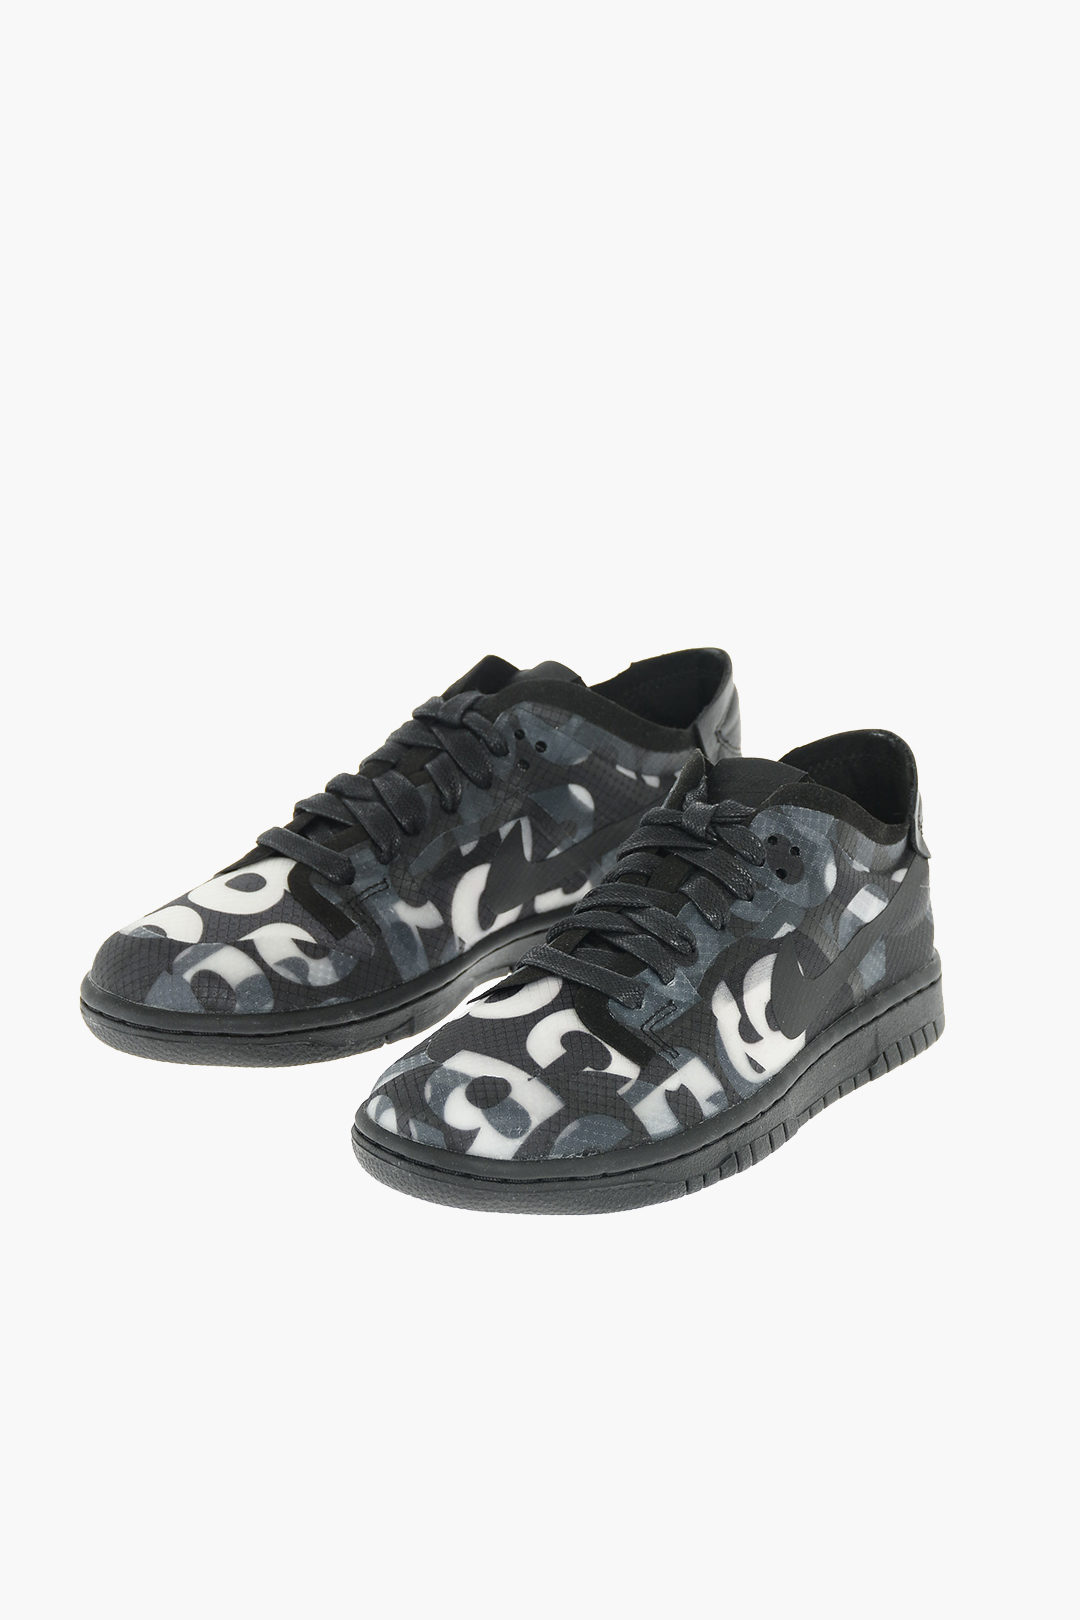 stropdas B.C. Gastheer van Nike COMME DES GARCONS fabric DUNK sneakers women - Glamood Outlet